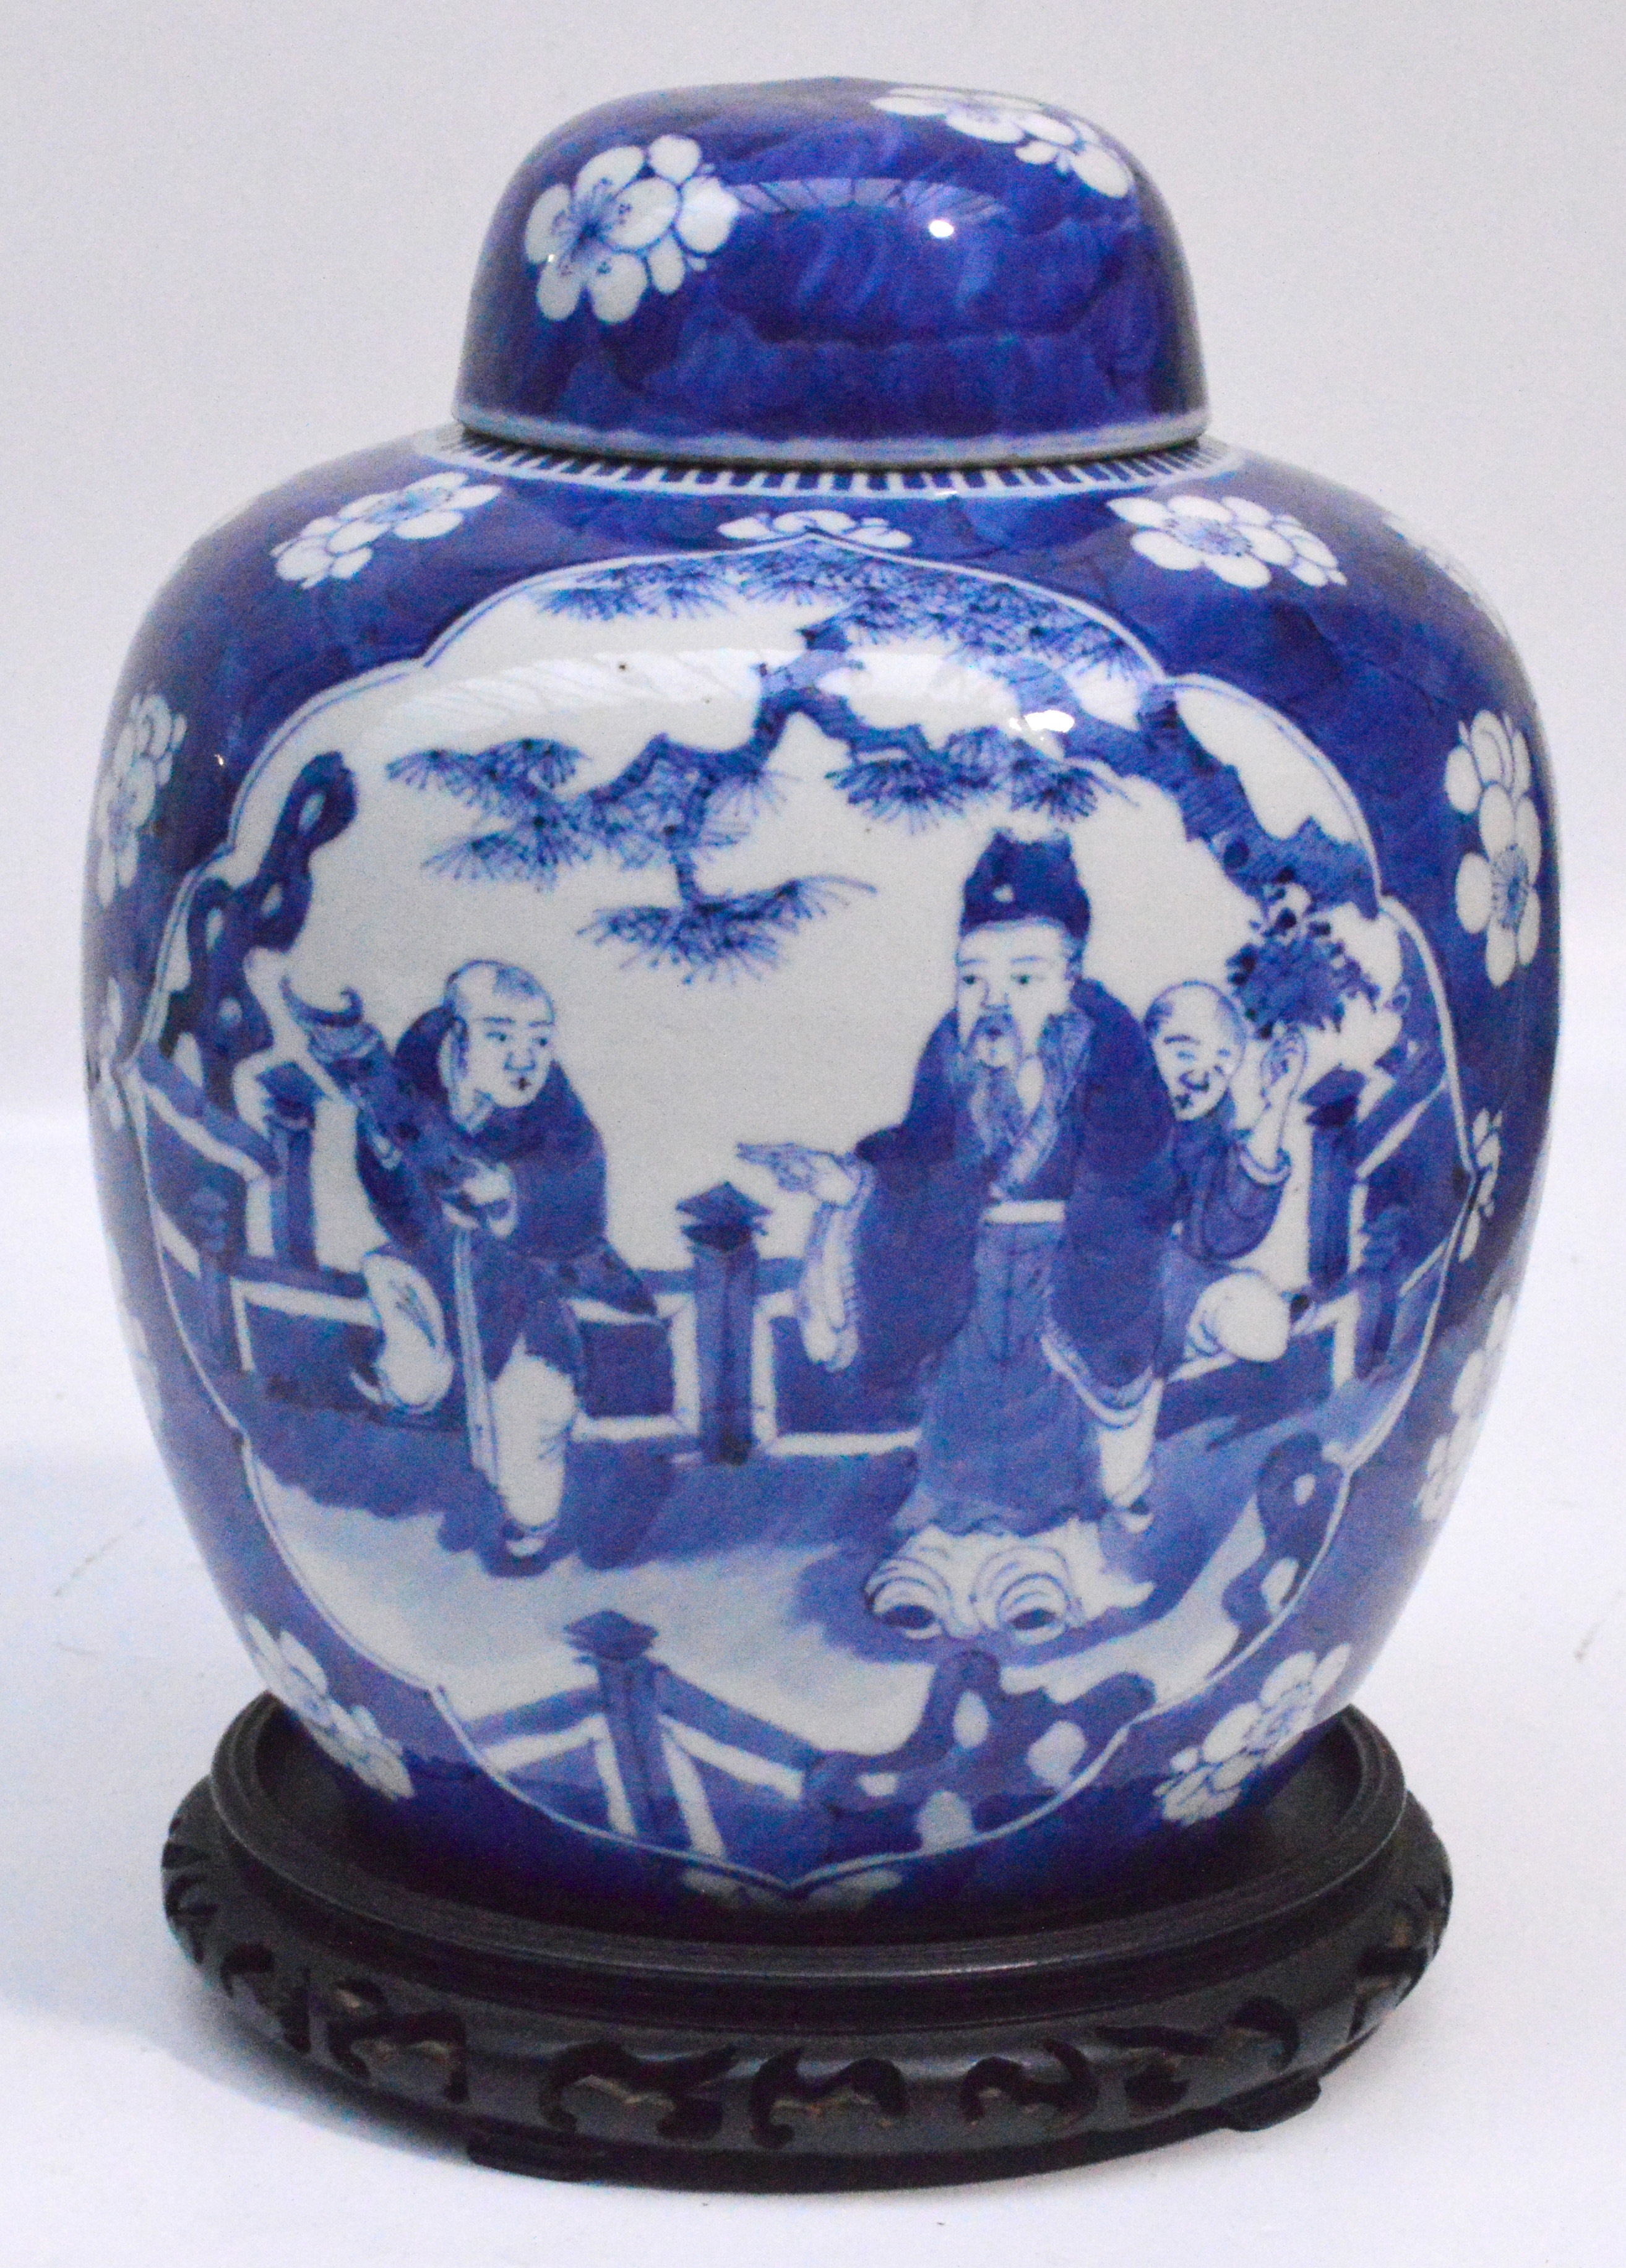 A 19th century Chinese porcelain ginger jar and cover painted in underglaze blue with two panels